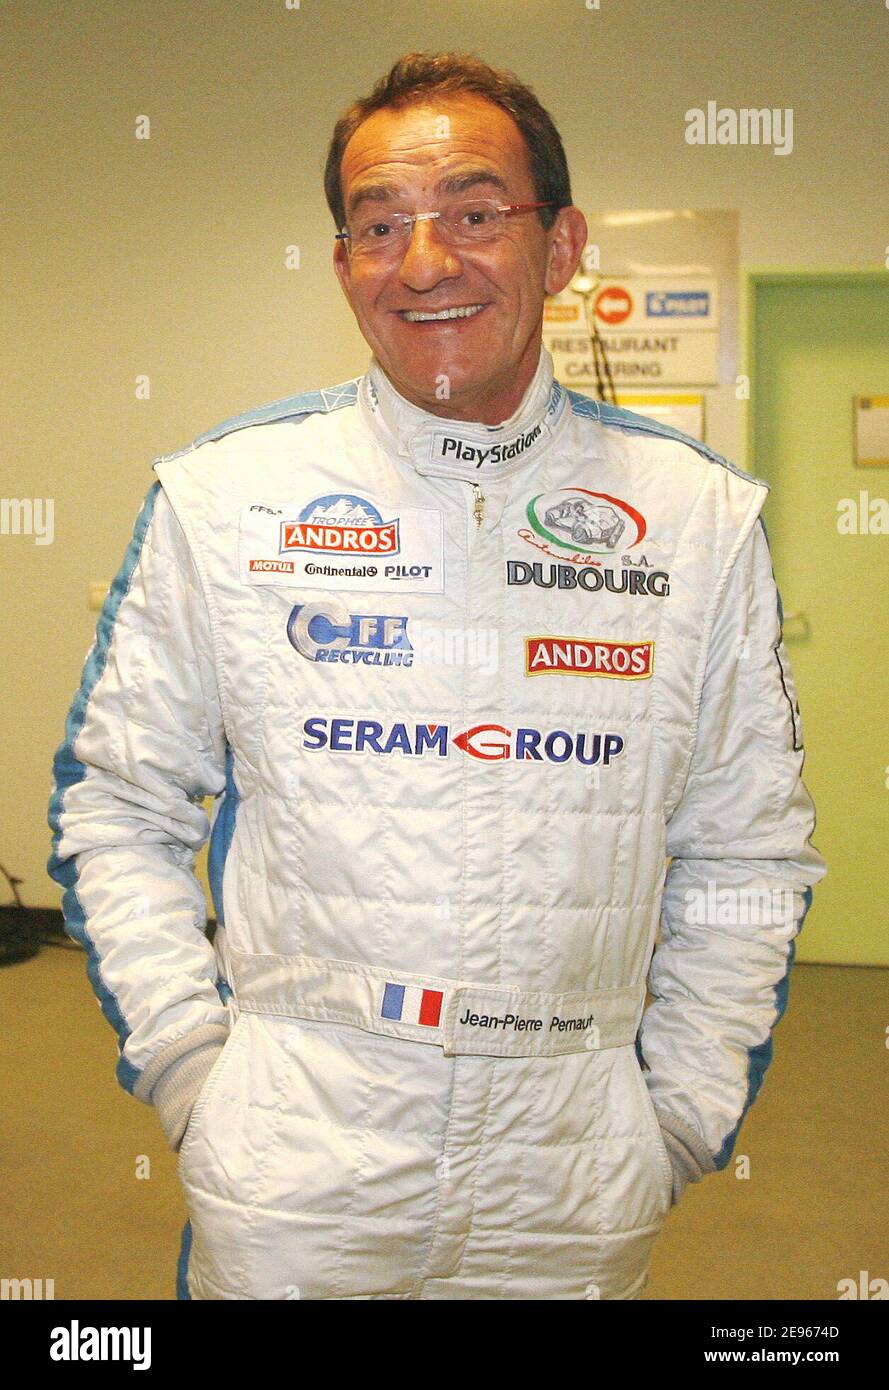 Jean-Pierre Pernaut attends the Andros Trophy held at the Stade de France,  in Saint-Denis, near Paris, France, on March 18, 2006. Photo by Mehdi  Taamallah/ABACAPRESS.COM Stock Photo - Alamy